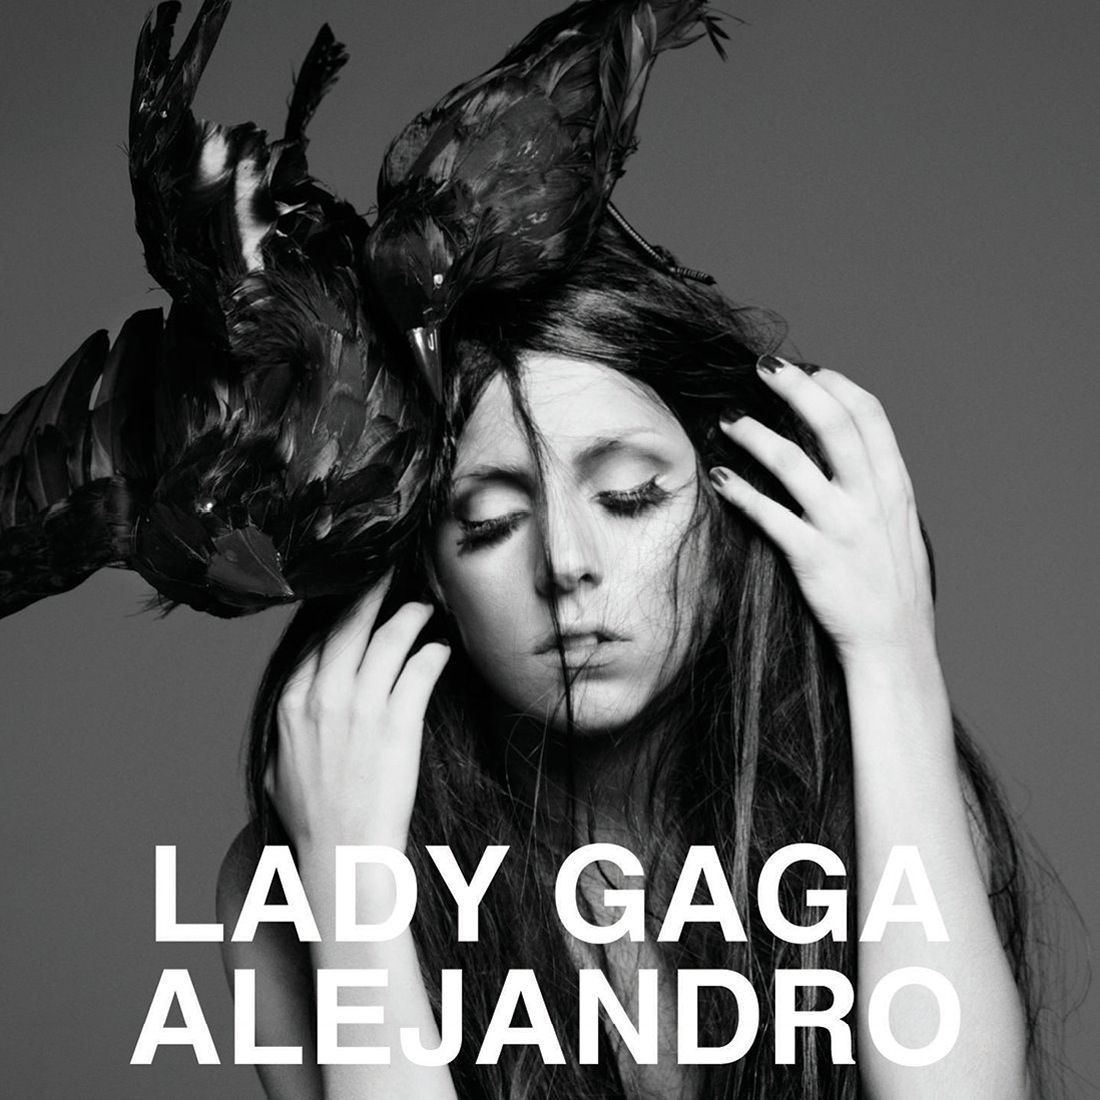 14 years ago on this day, Lady Gaga released 'Alejandro' as the third single from The Fame Monster.